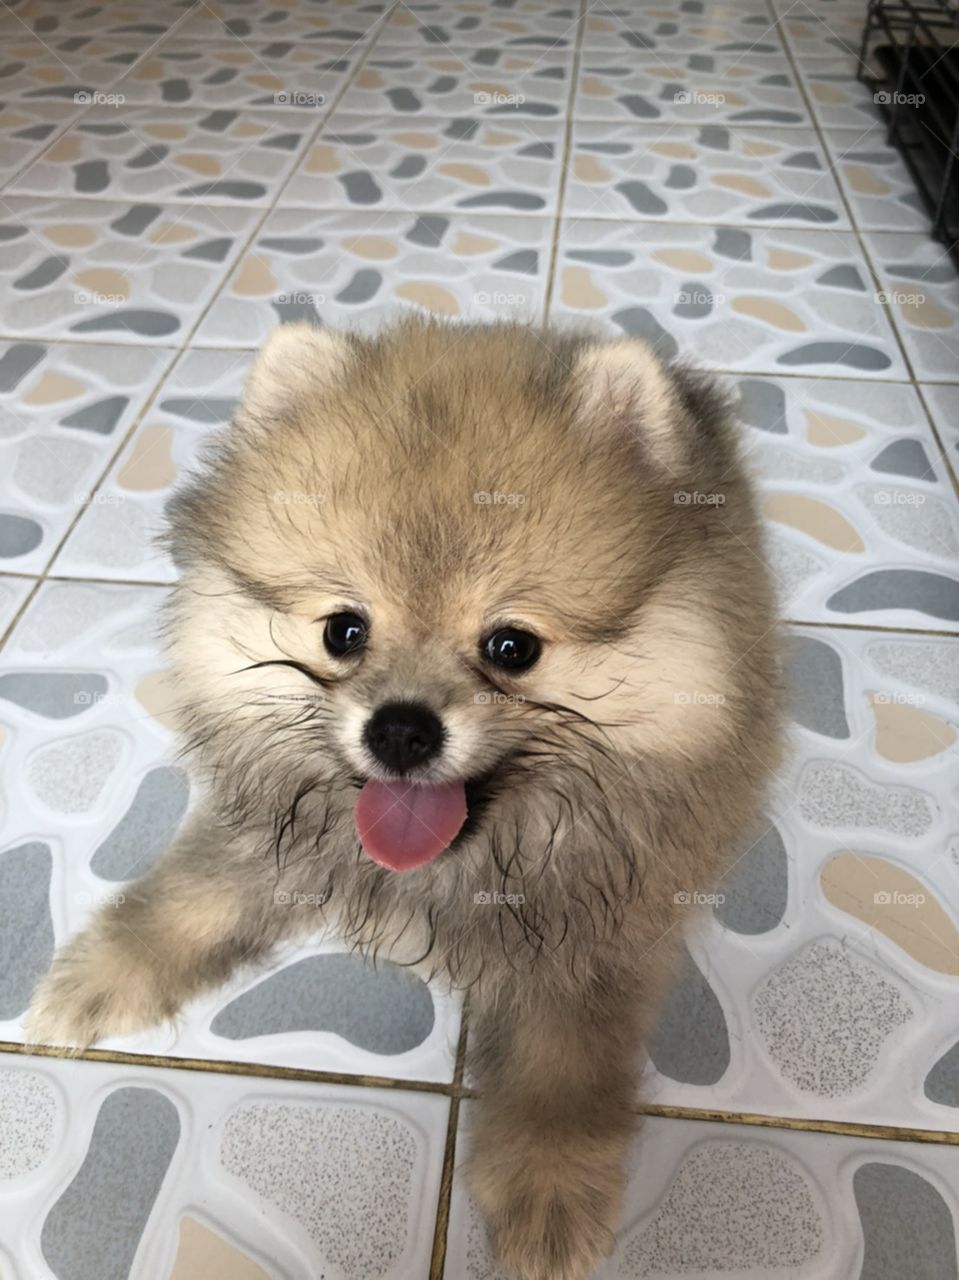 the beautiful face , black round eyes and red tongue of the puppy " pomeranian"